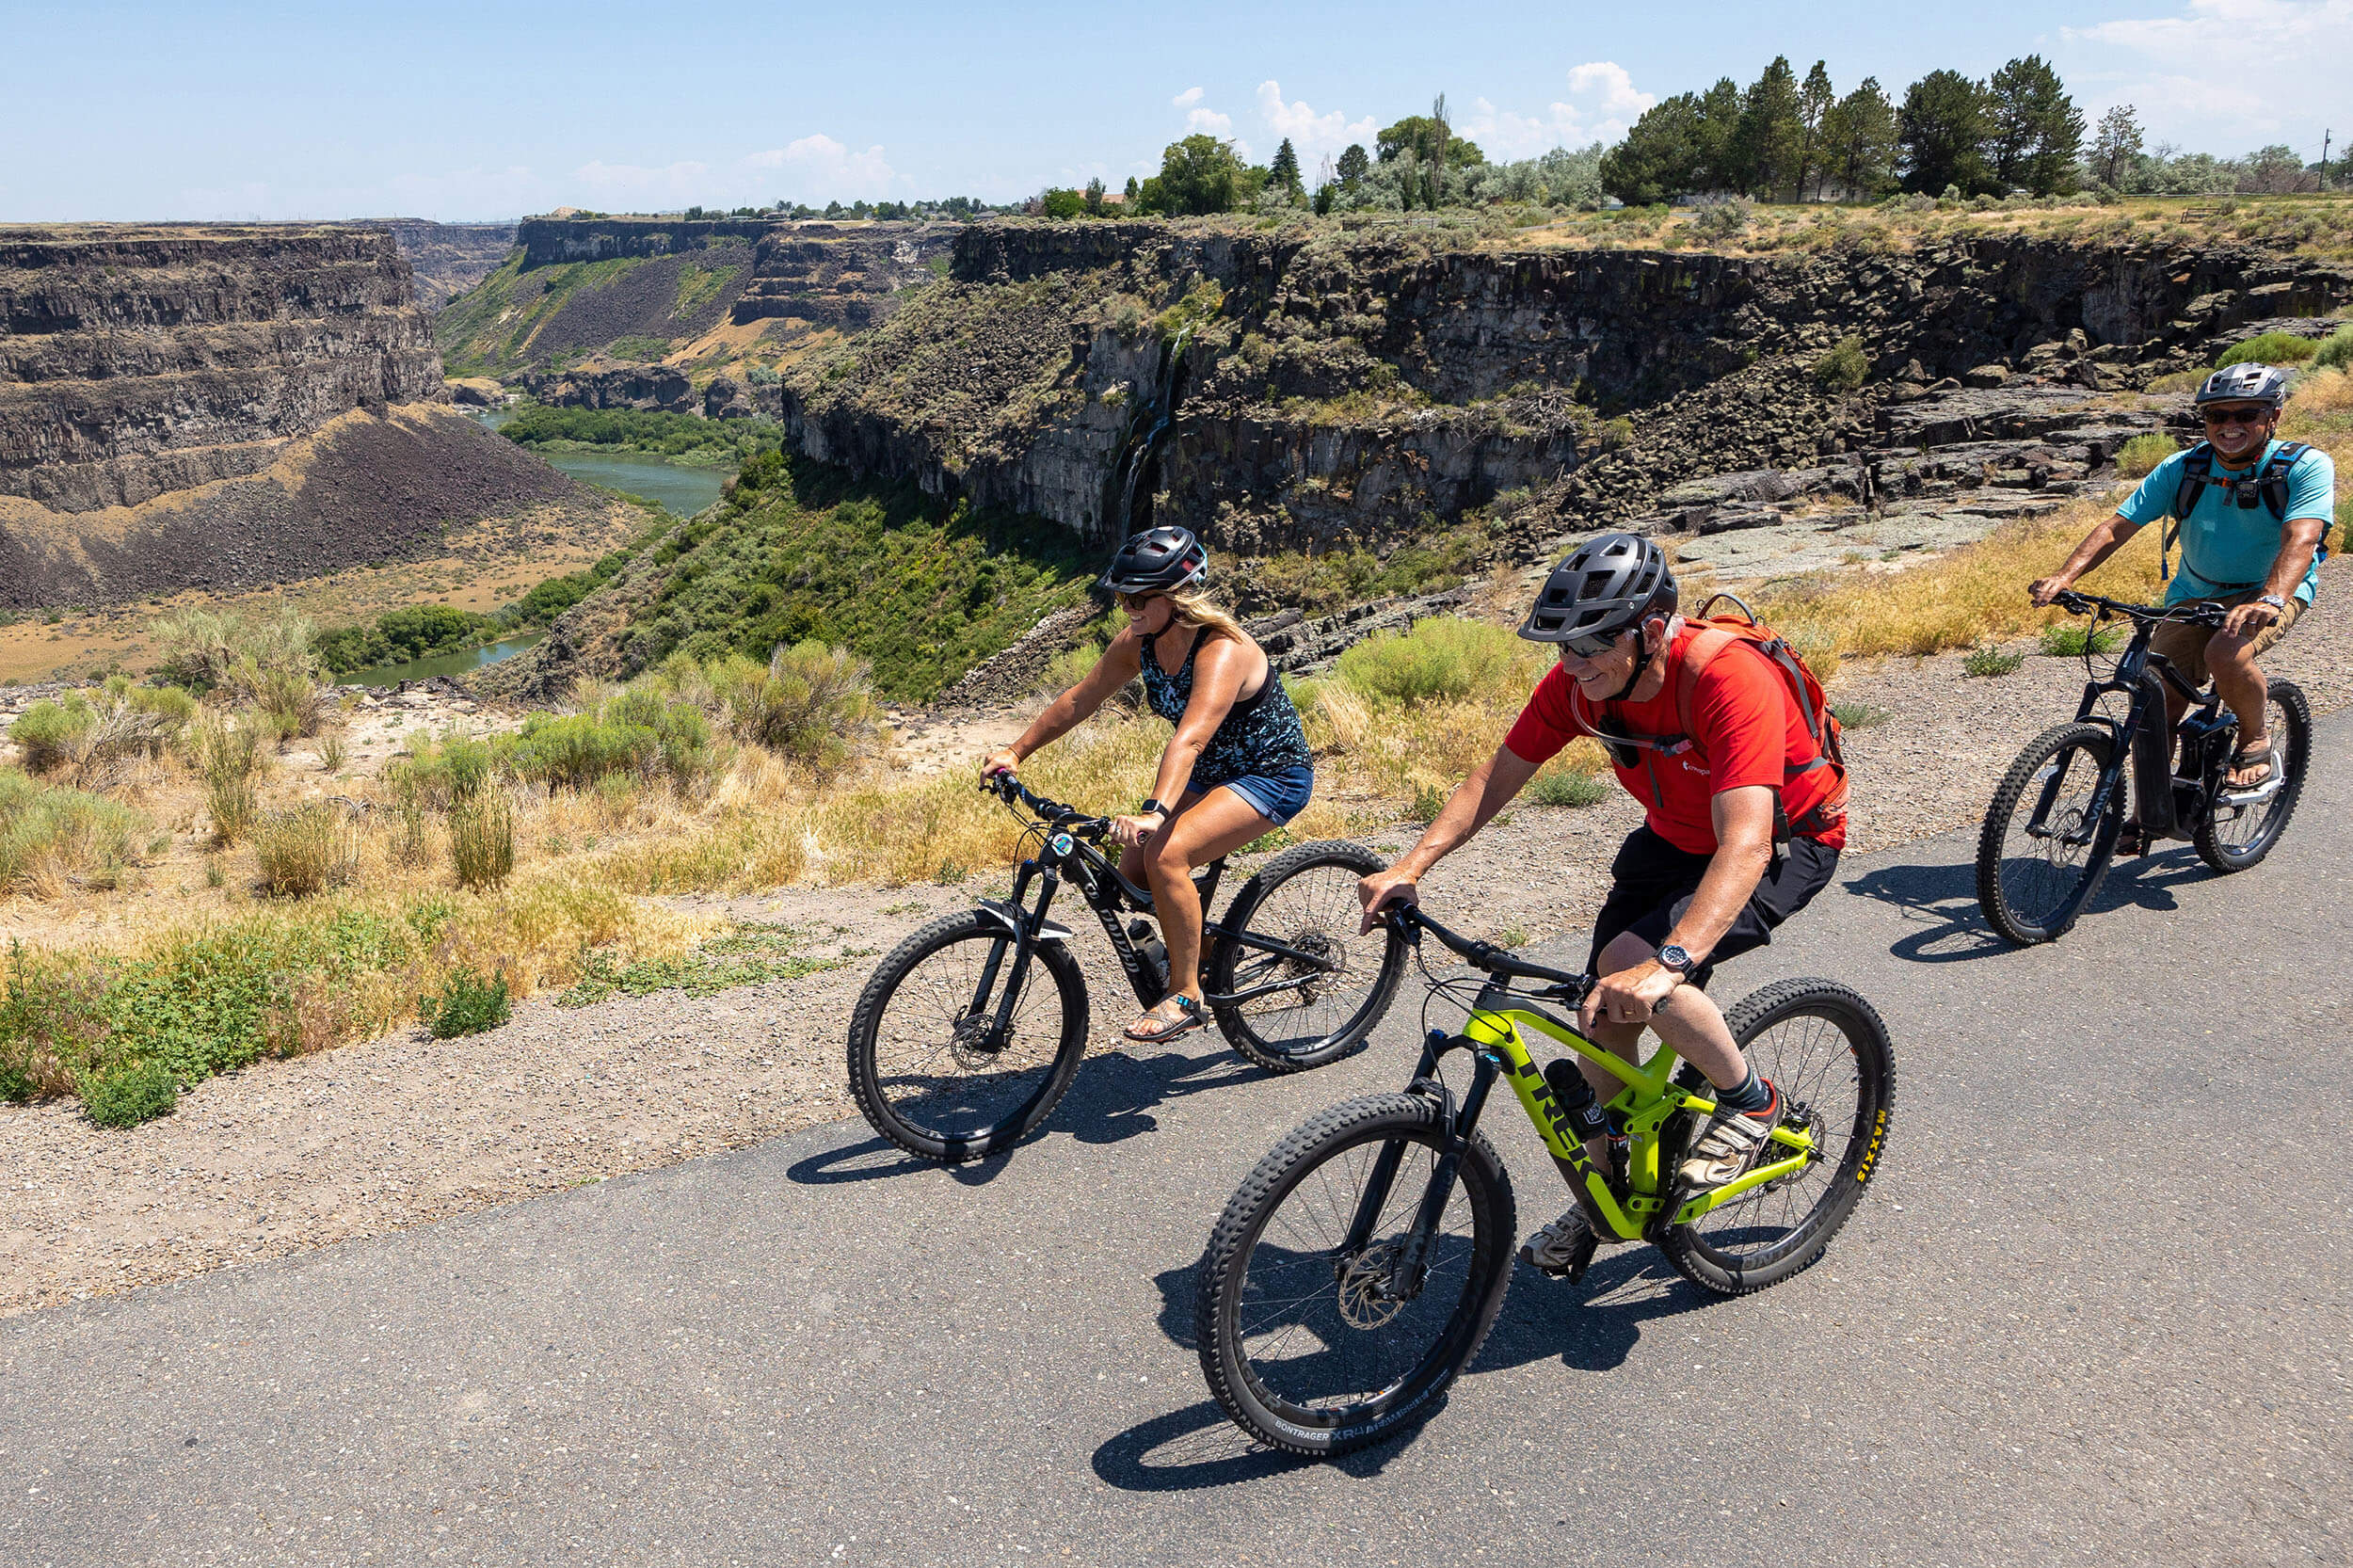 Three bikers with helmets on ride together on a road above the Snake River Canyon.